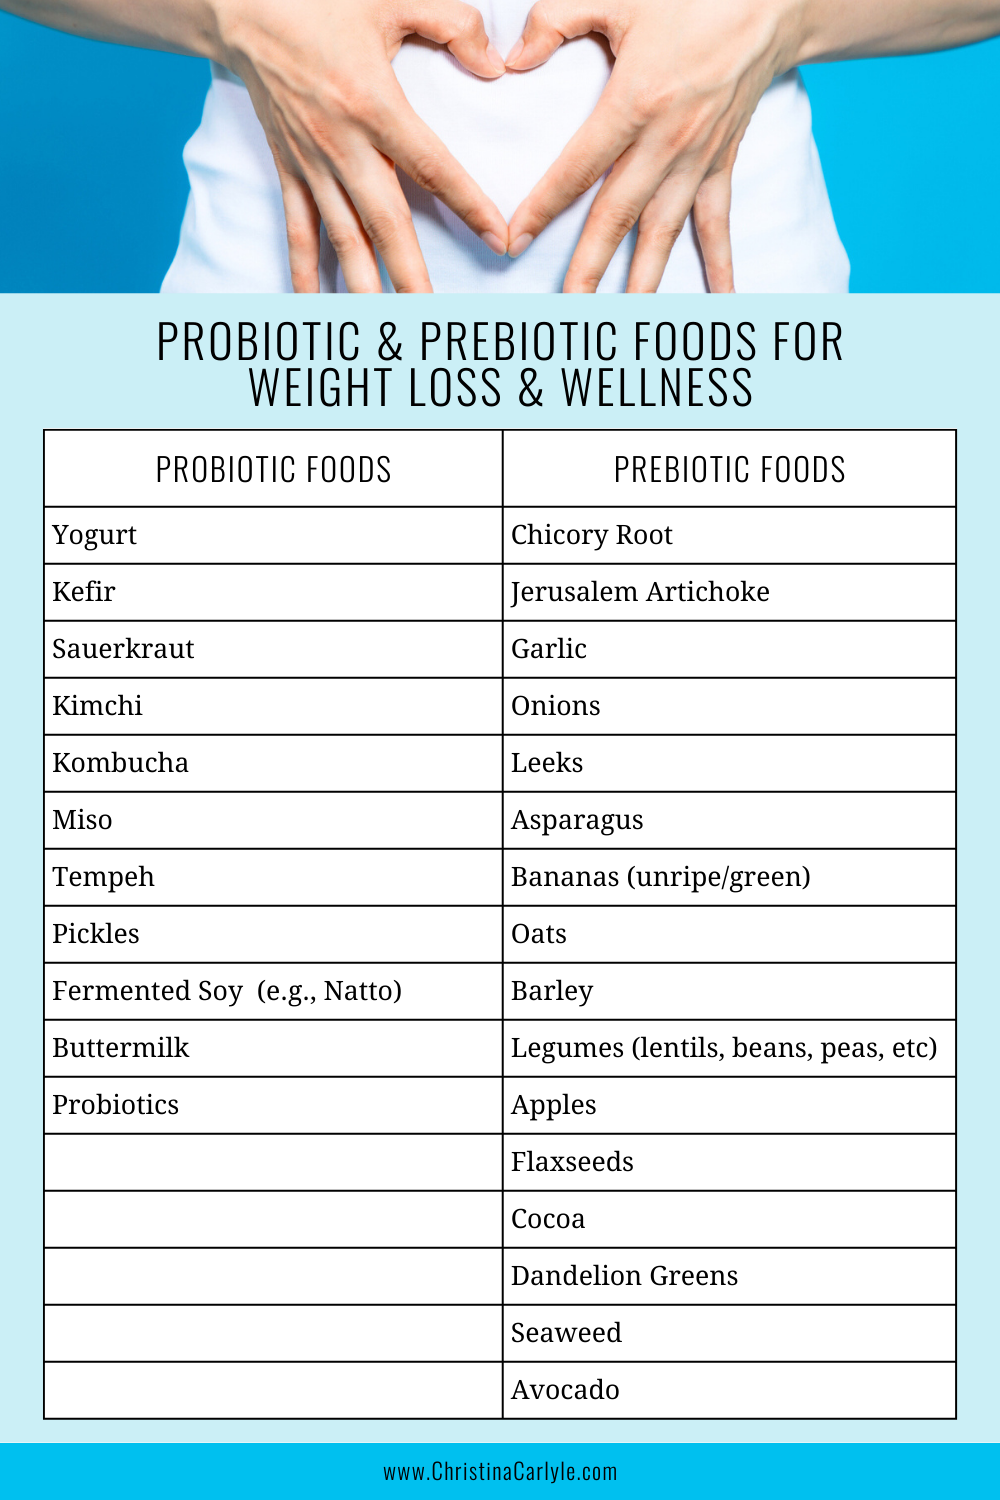 A chart with foods highest in probiotics and prebiotic fibers